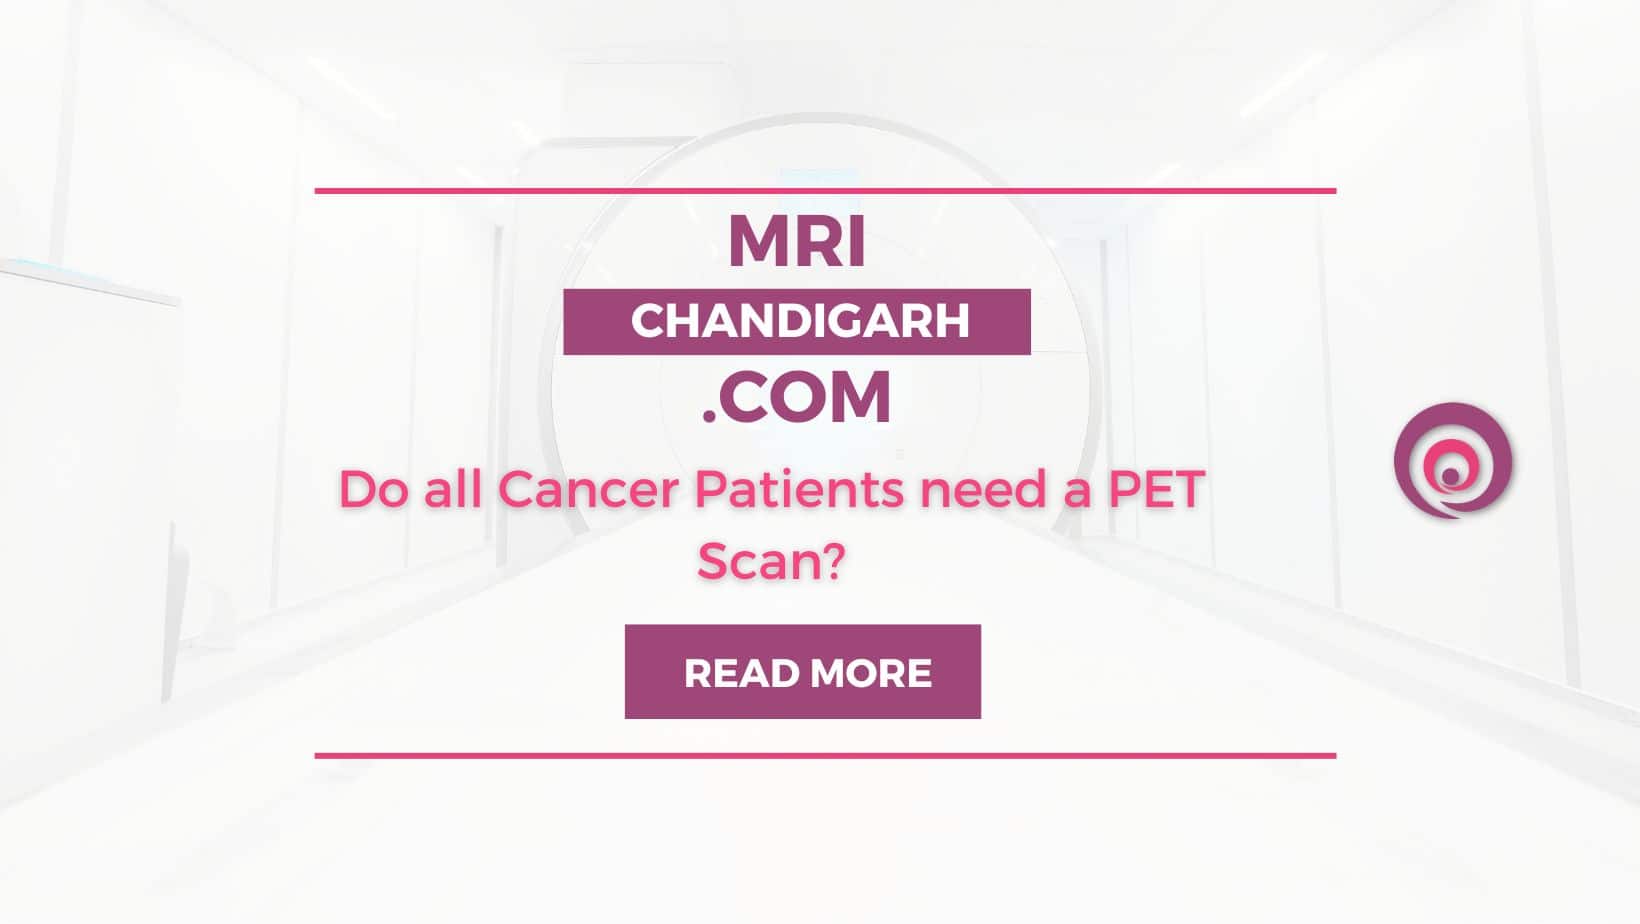 Do all Cancer Patients need a PET Scan?